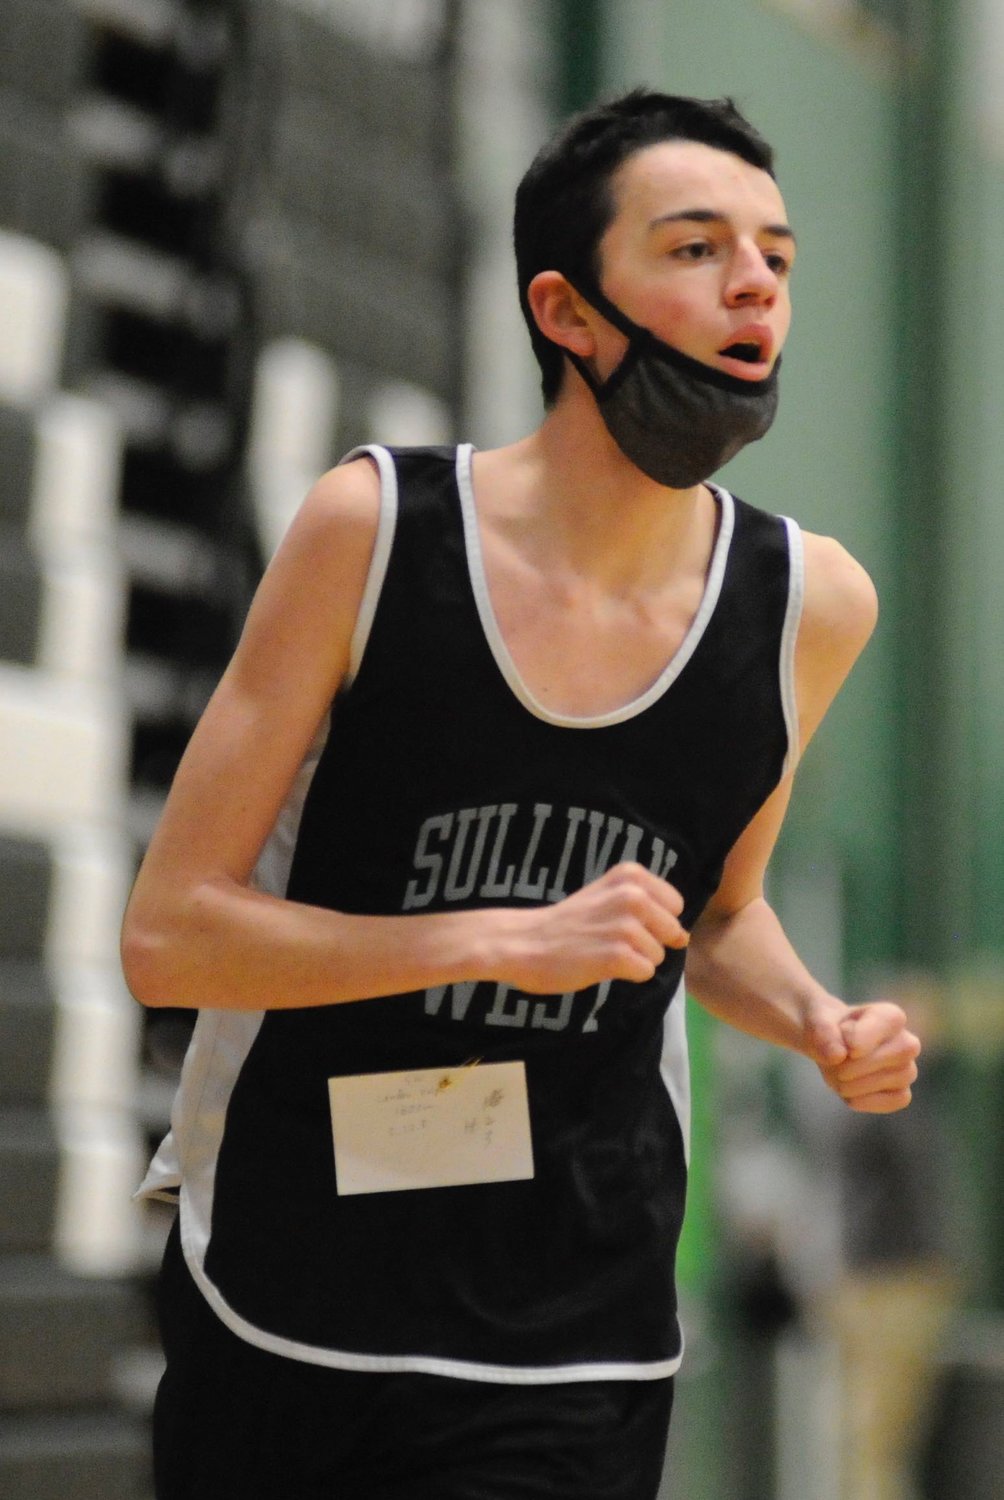 Sullivan West’s Landen Volpe was a member of the Bulldogs team that placed second in the boys’ varsity 1,600 meter run.